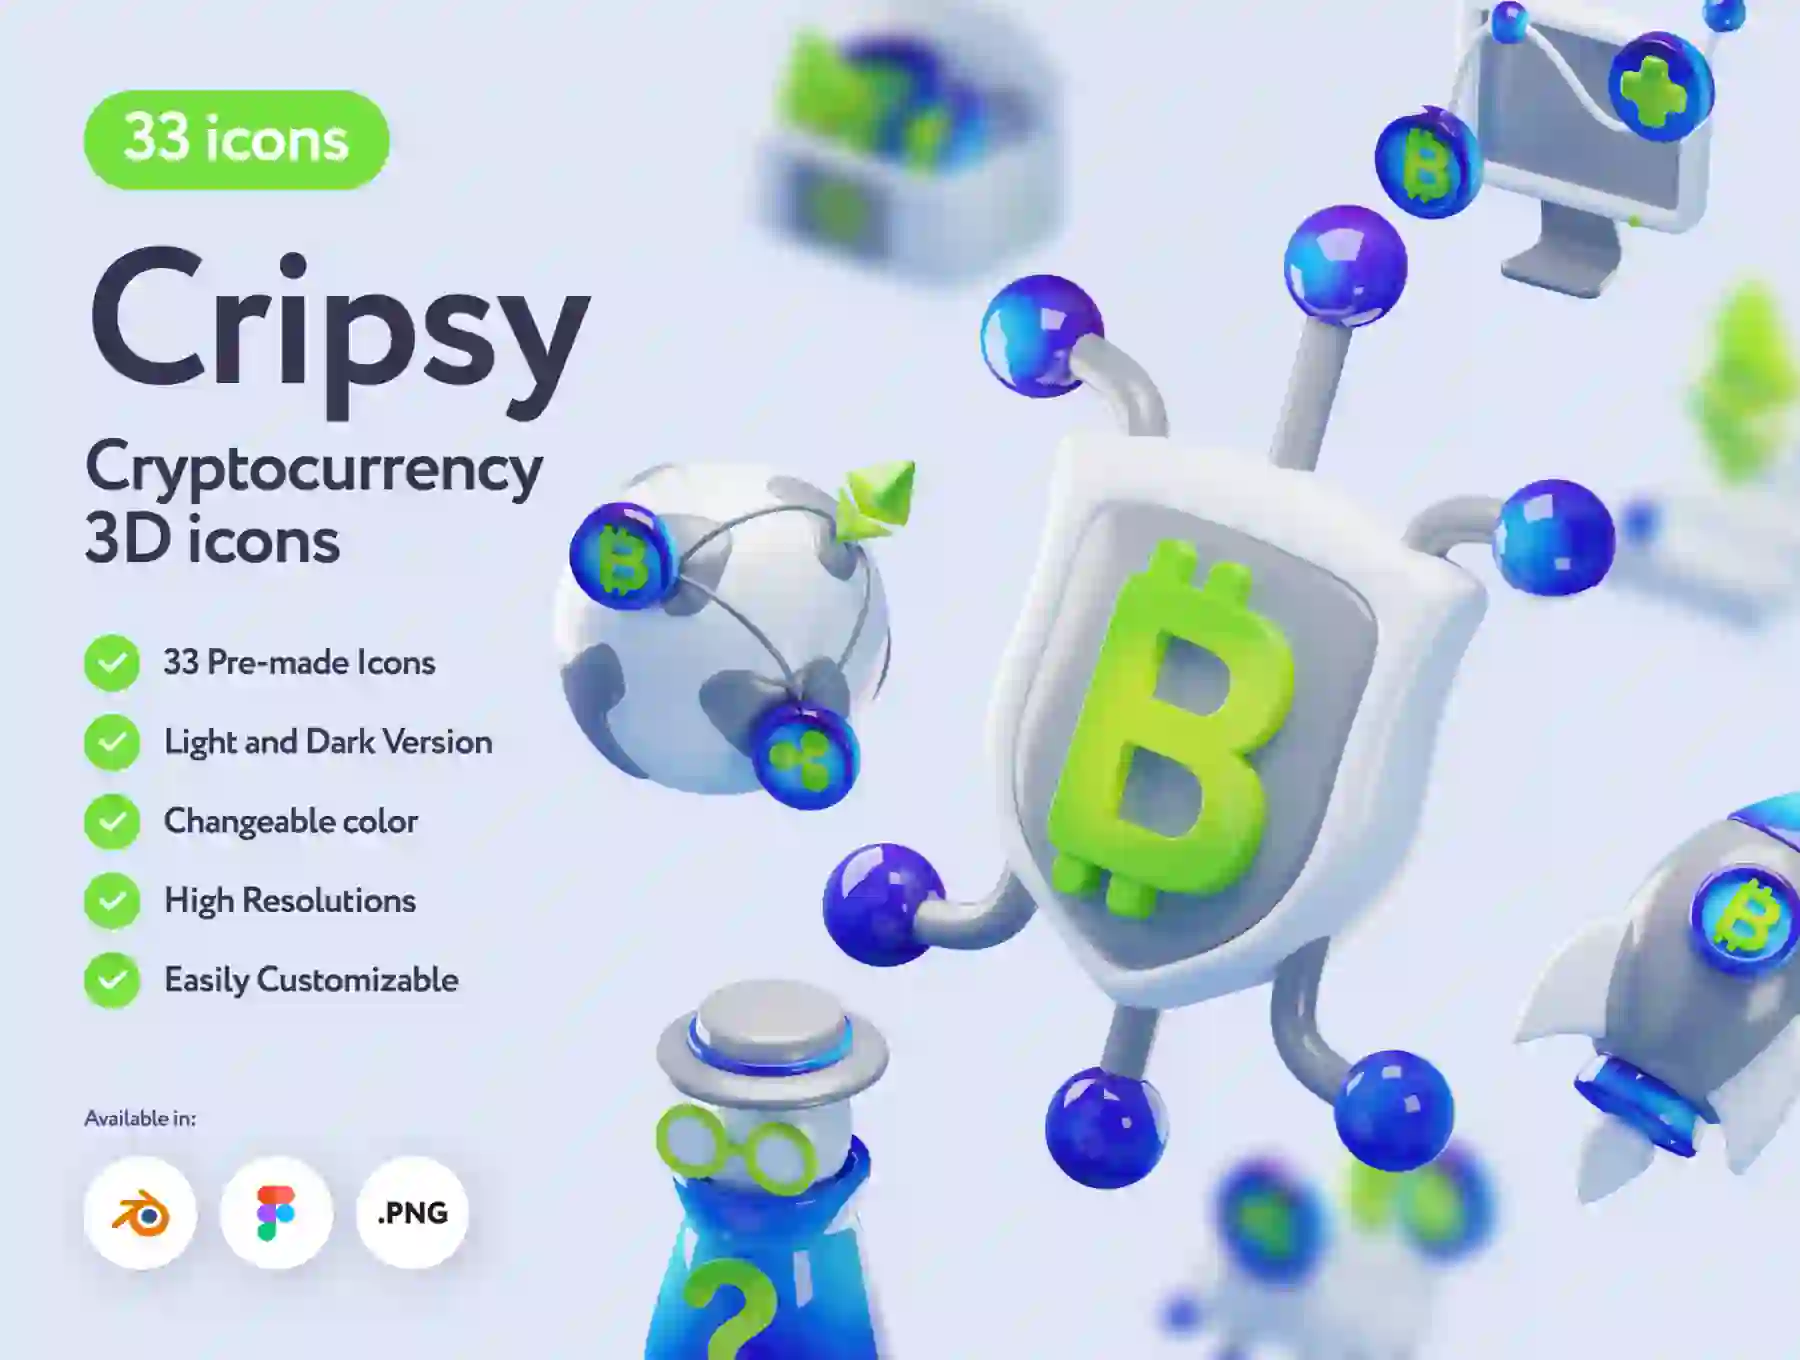 Cripsy Cryptocurrency 3D Icons